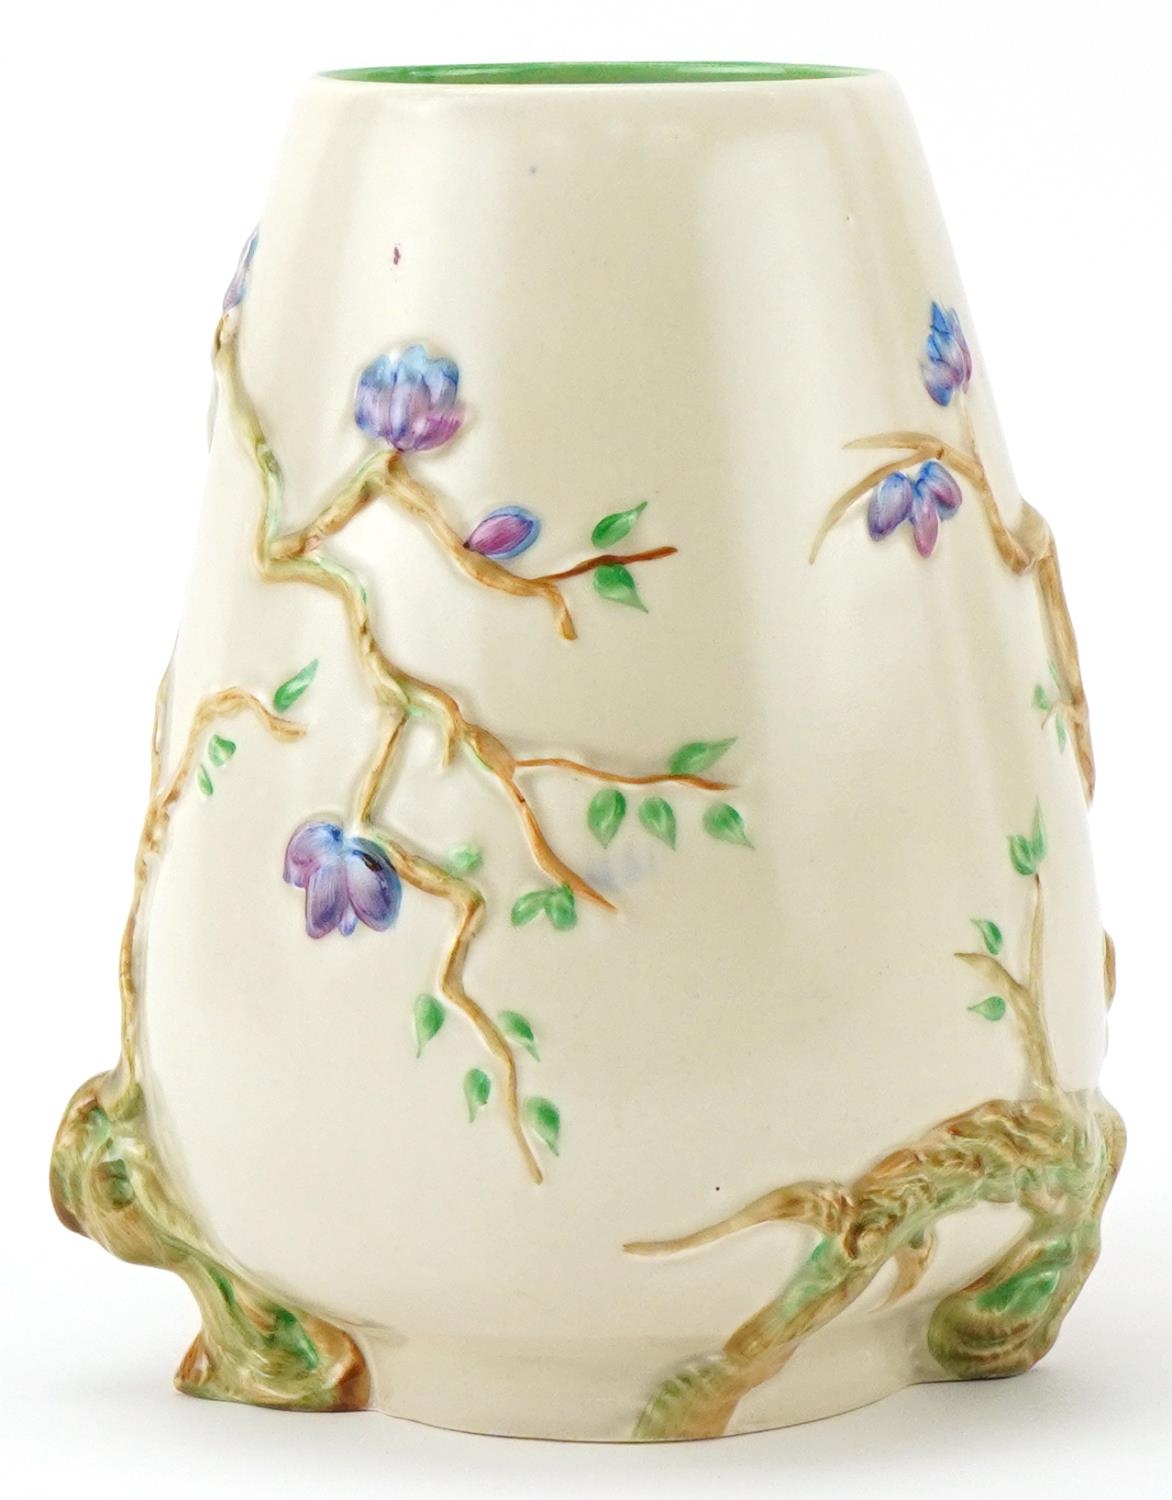 Clarice Cliff Newport pottery vase hand painted and decorated in relief in the Cherry Tree - Image 2 of 3